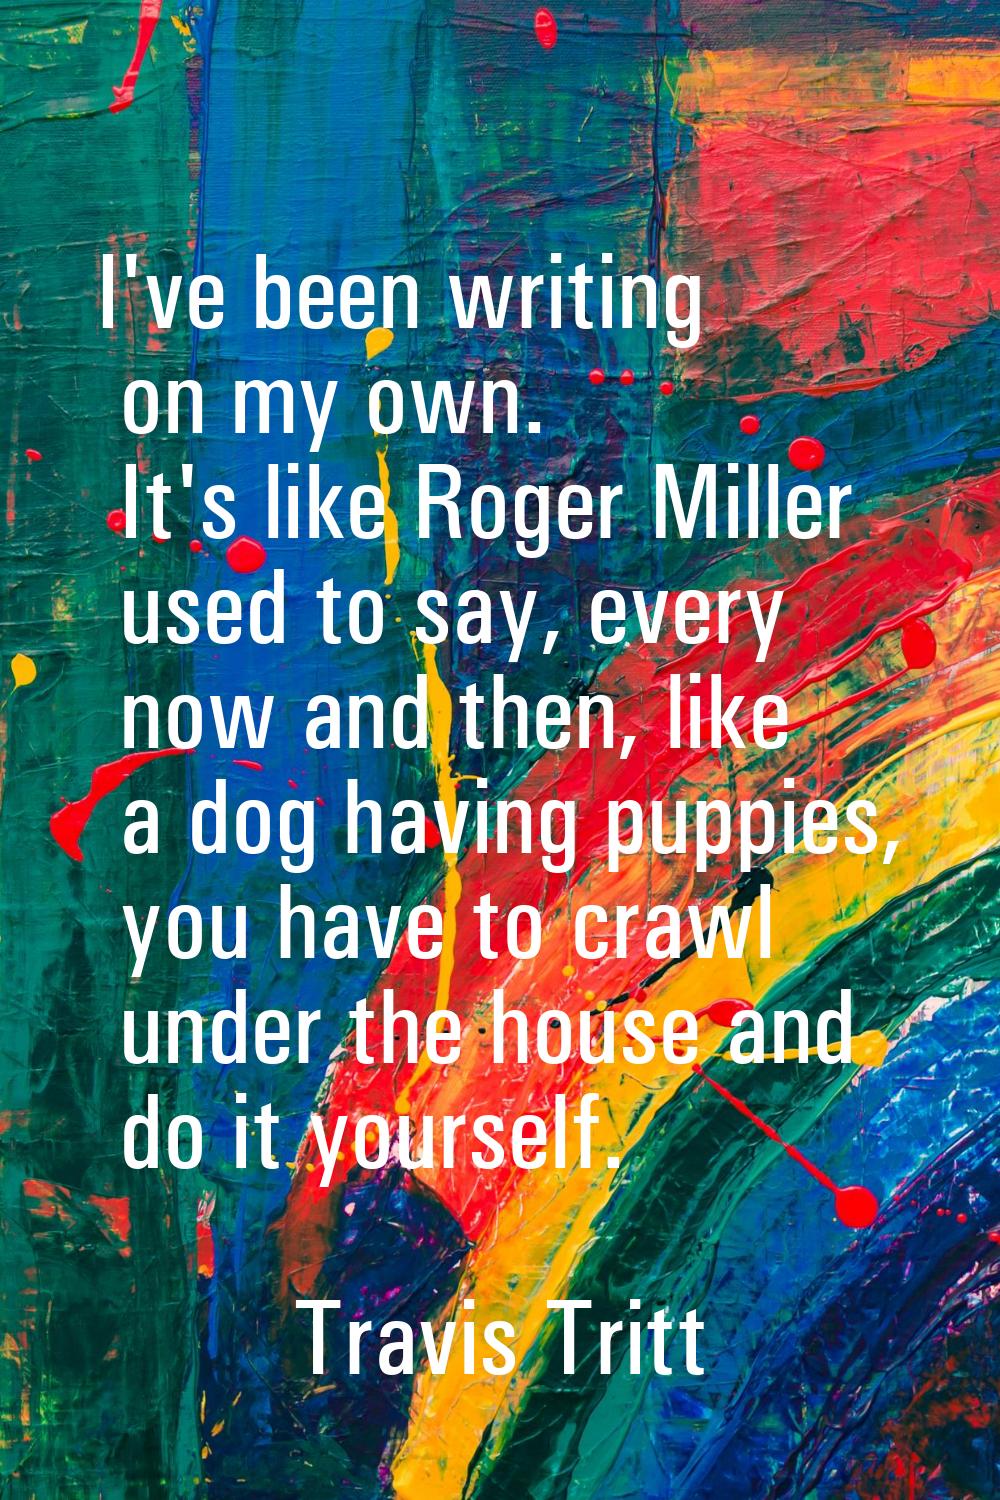 I've been writing on my own. It's like Roger Miller used to say, every now and then, like a dog hav